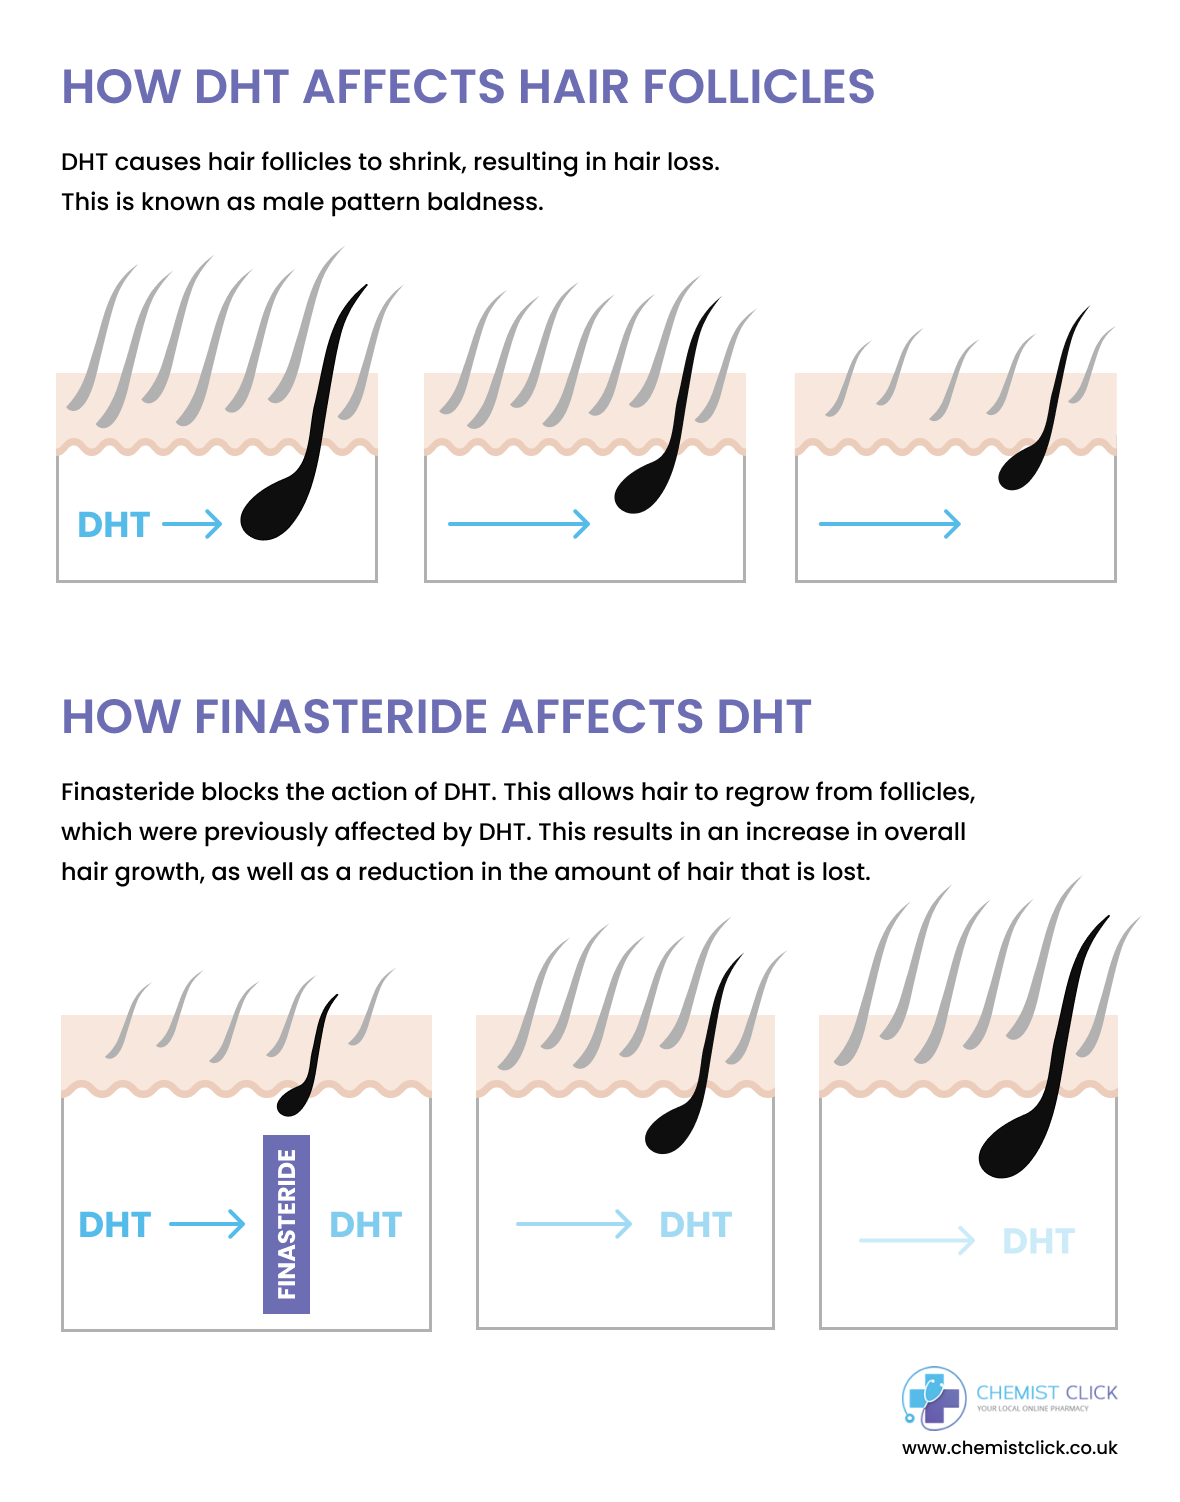 Infographic showing how finasteride works